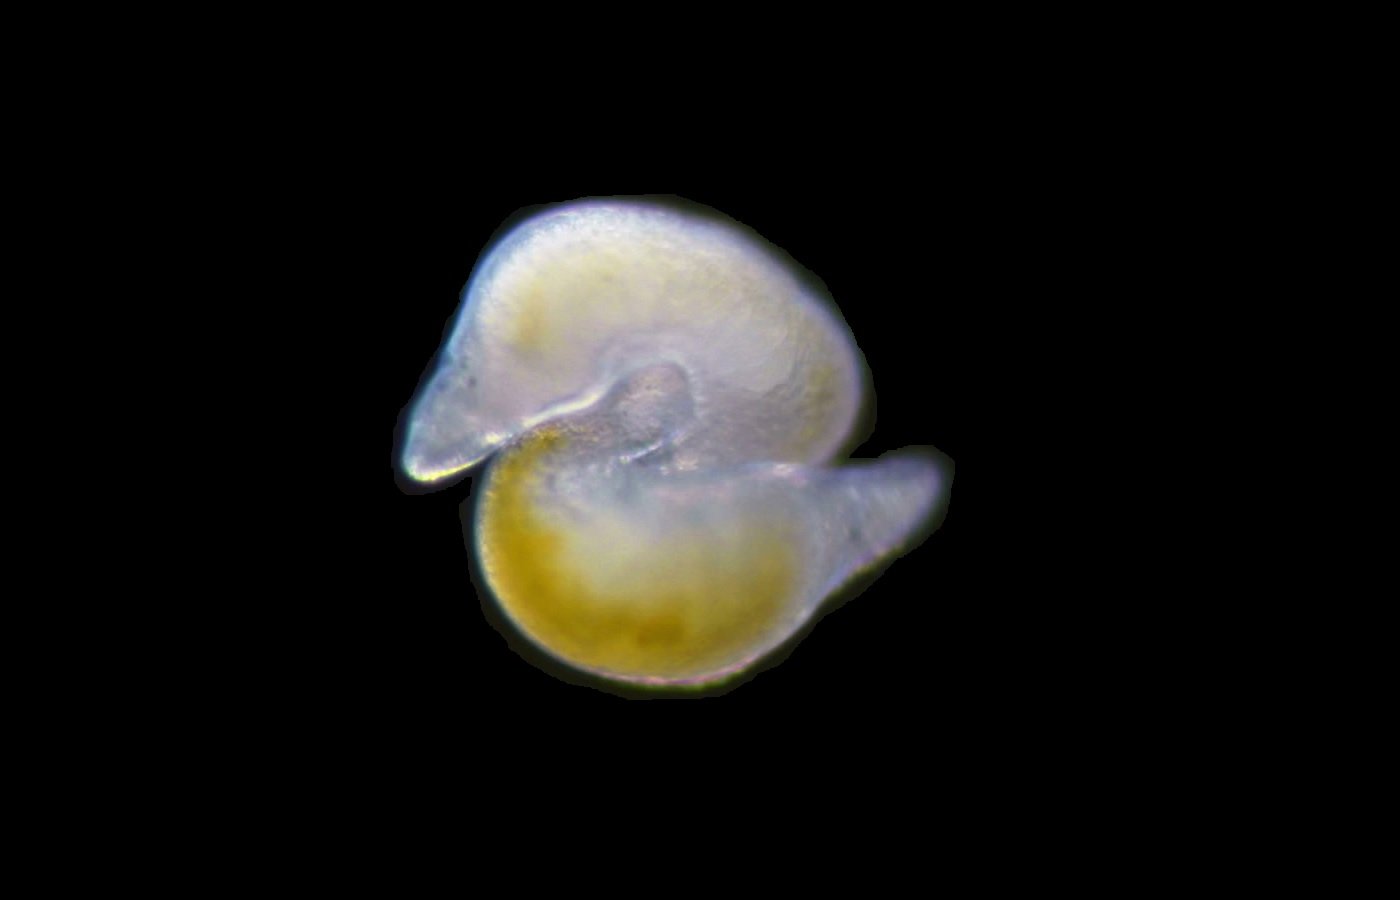 The regenerative abilities of the flatworm Macrostomum lignano serve as a model for how humans might regenerate tissues.